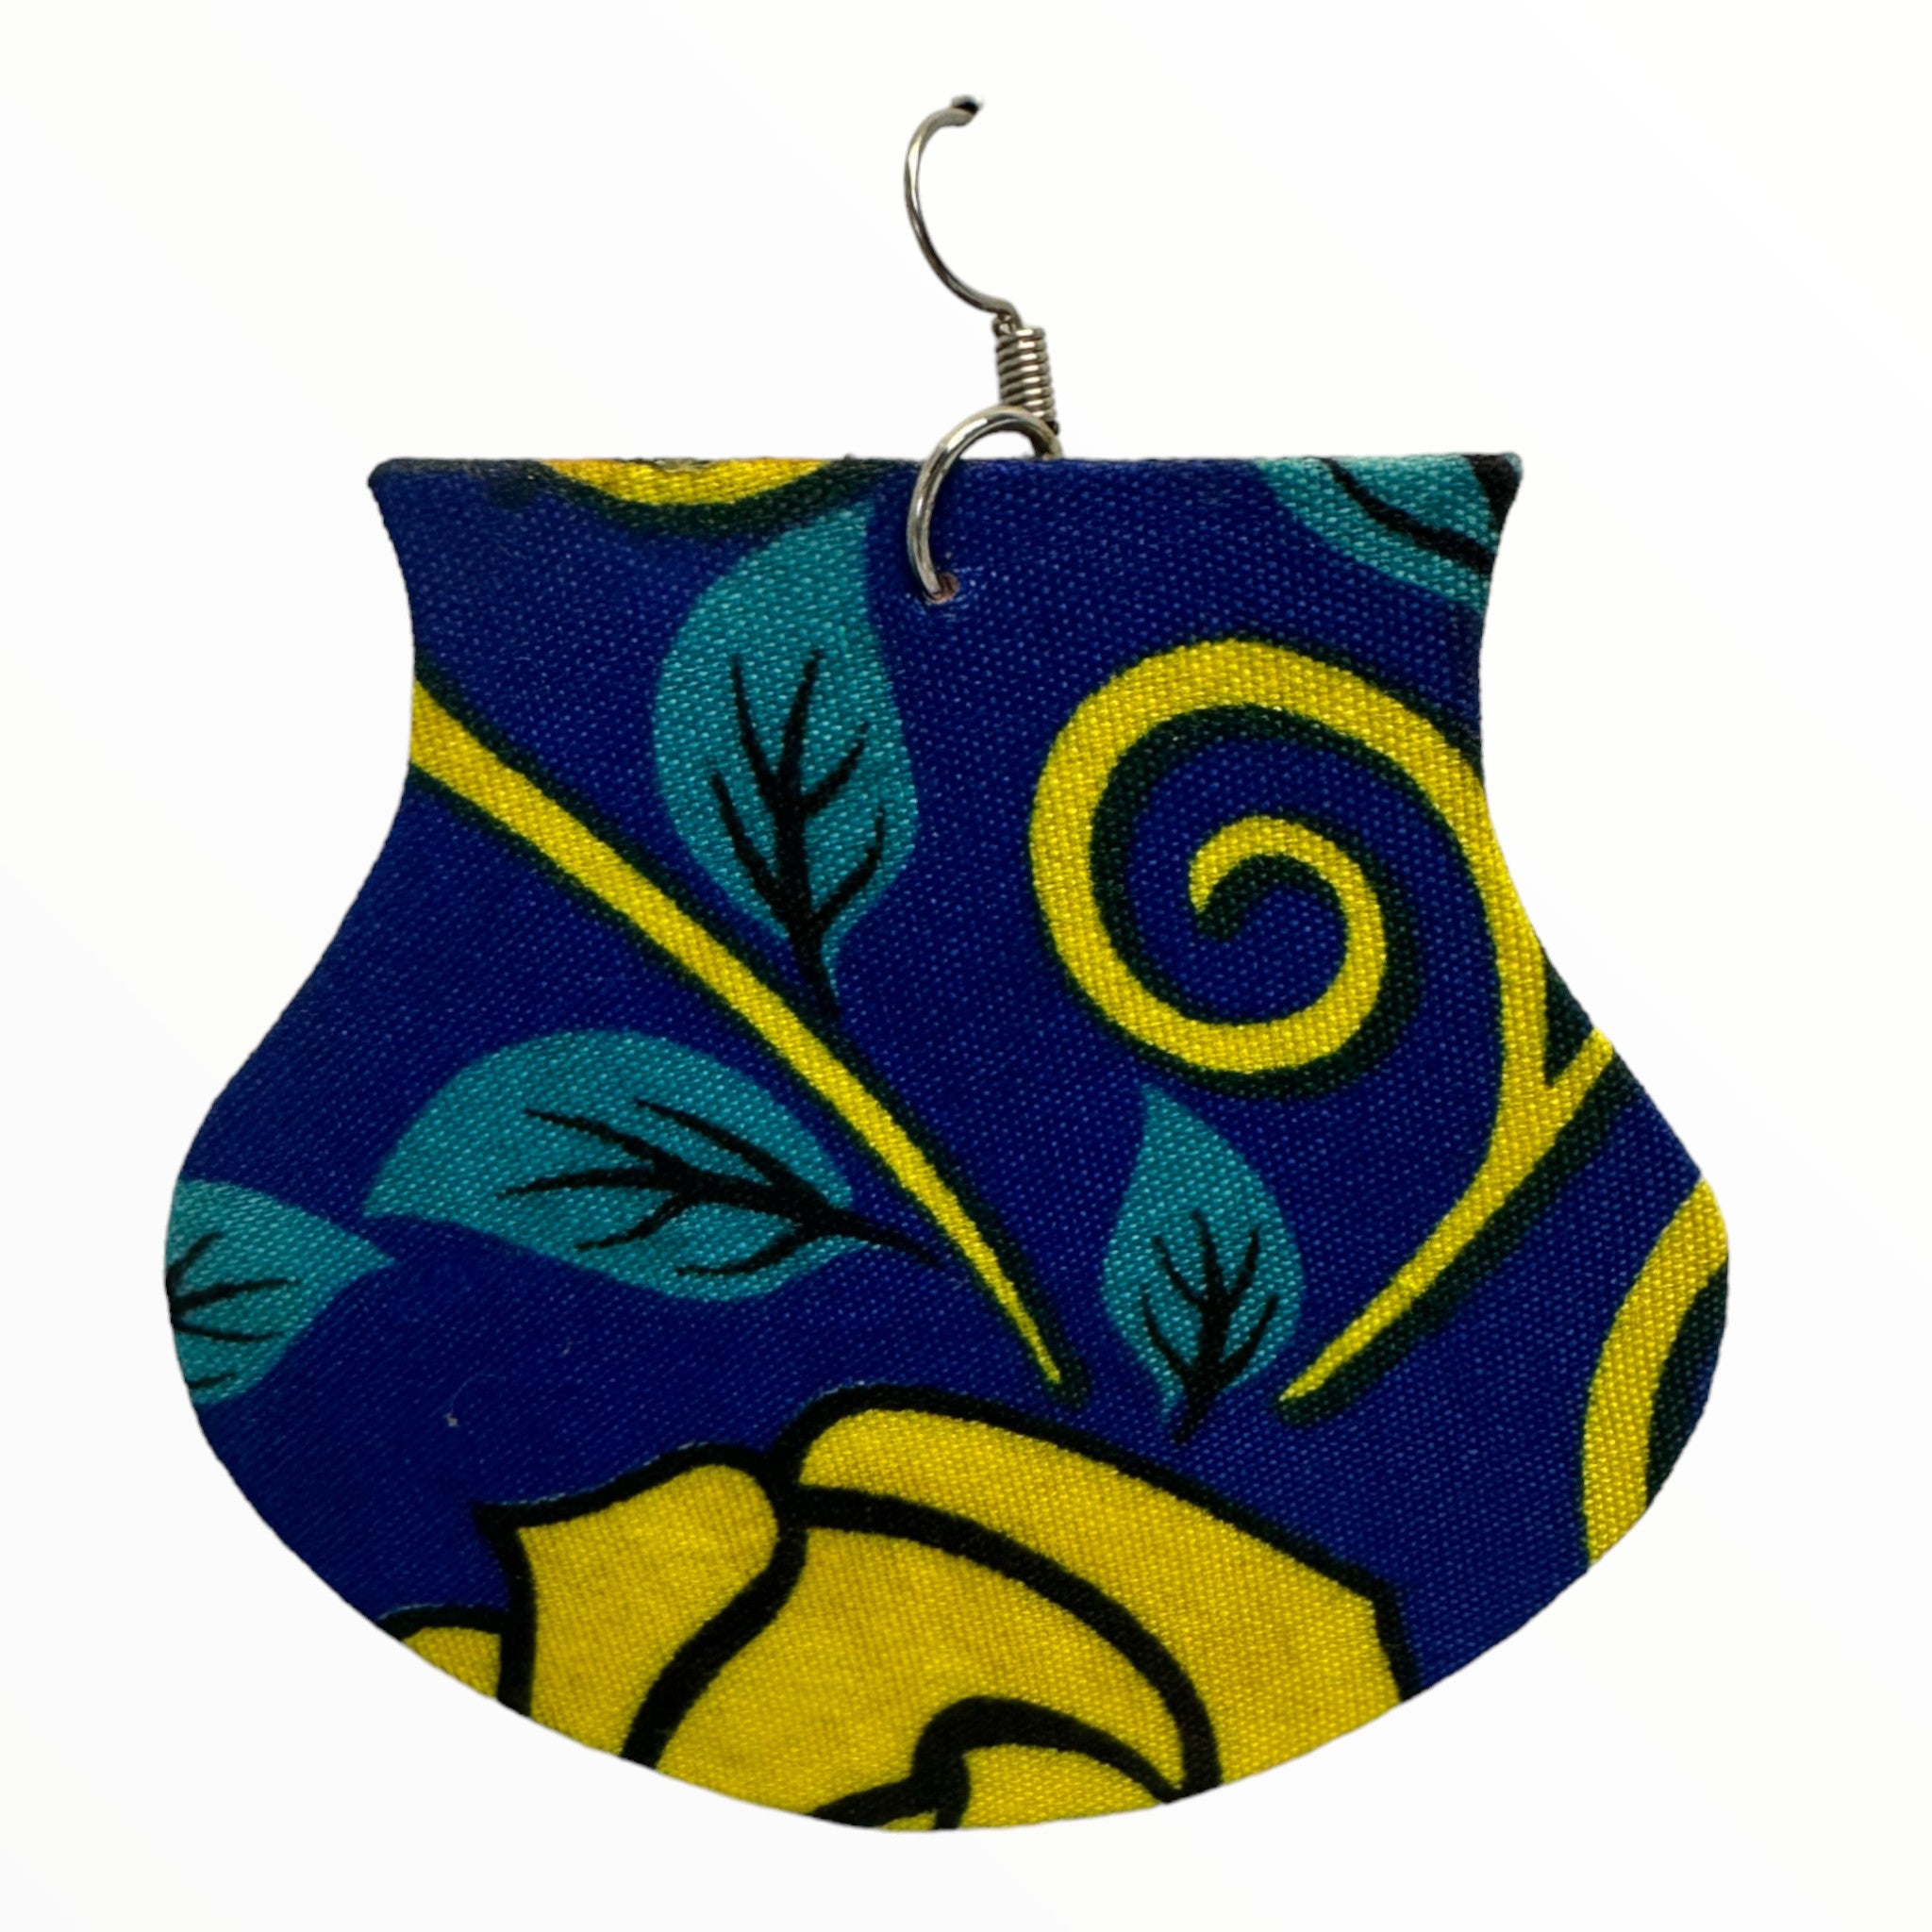 Afrocentric Ankara Fabric Earrings- Vase Shape (Turquoise, Yellow, Blue)